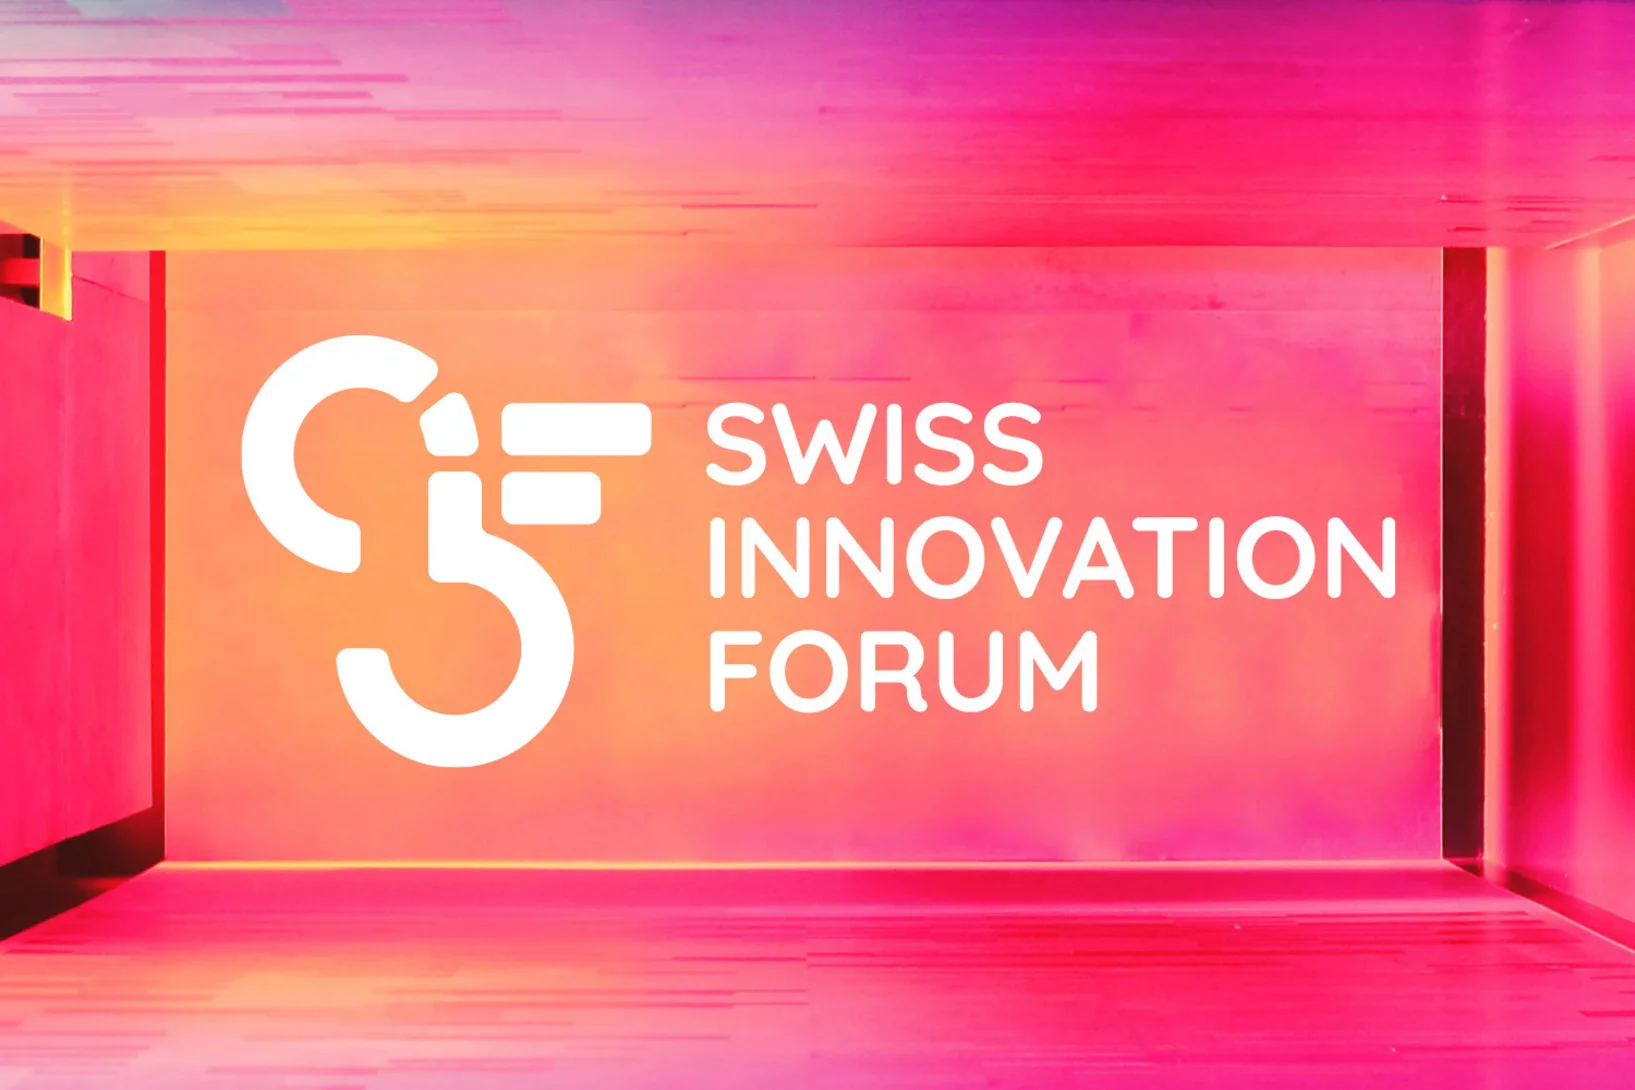 SIF 2023 will take place in the Congress Center in Basel on 30 November 2023 (image source: Swiss Innovation Forum).